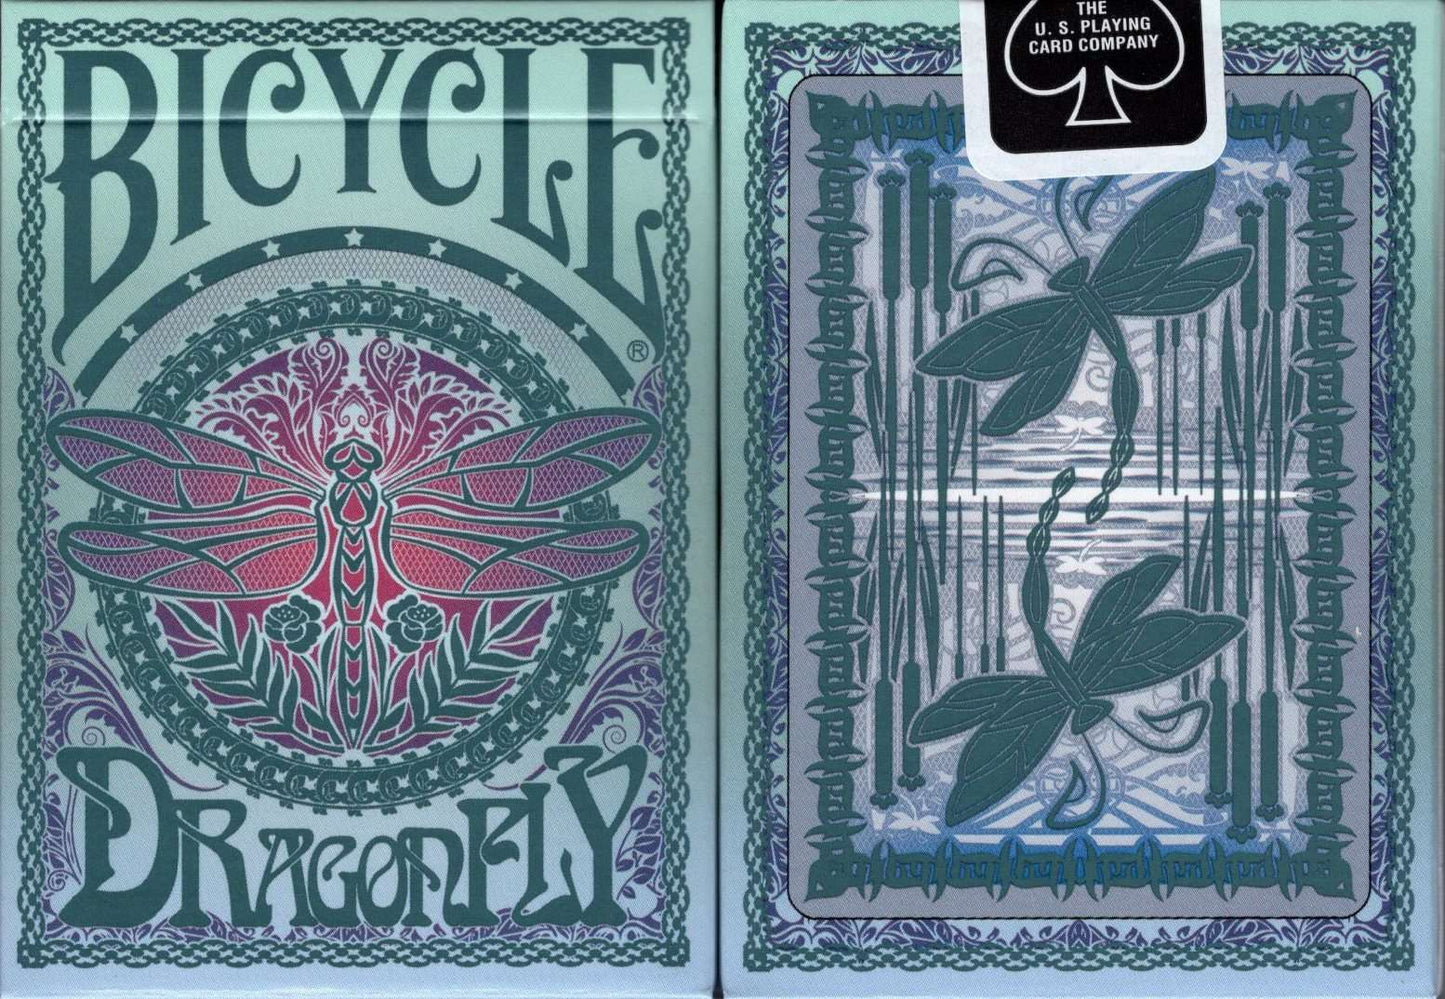 PlayingCardDecks.com-Dragonfly Bicycle Playing Cards: Teal Deck